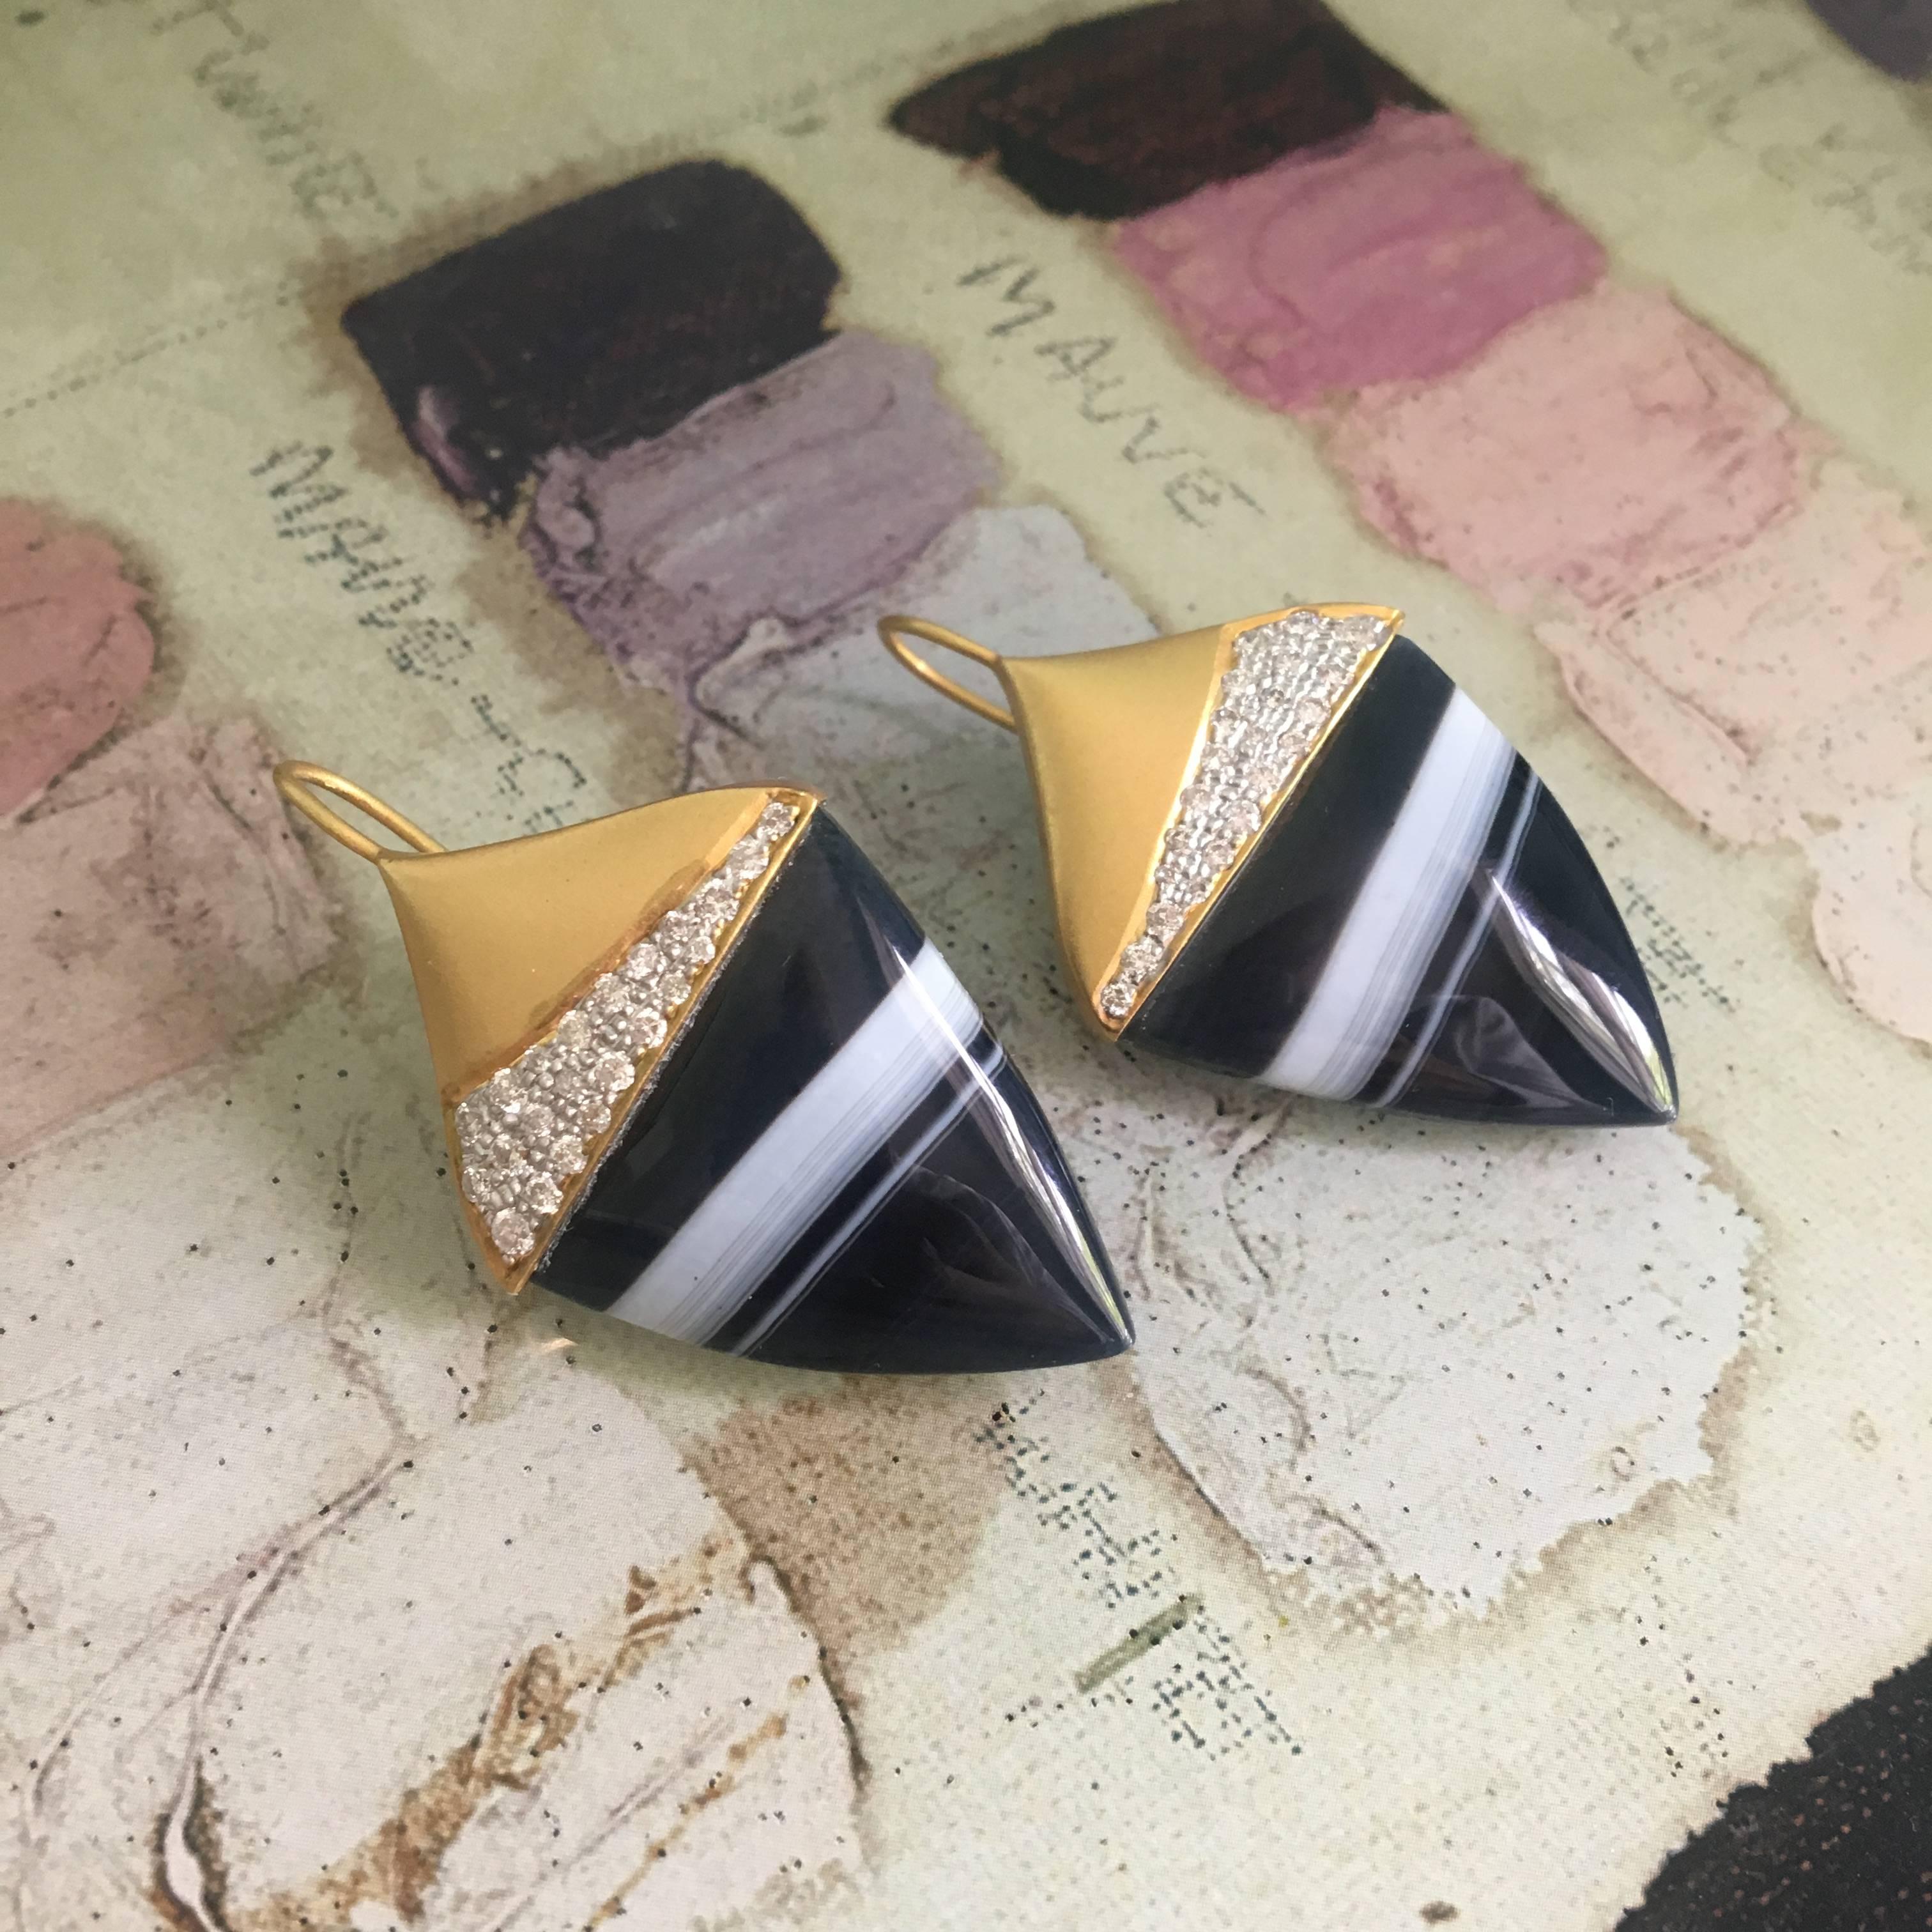 Black and white Striped Tuxedo Agate set in modern and sleek Diamond encrusted 18kt Yellow Gold Earrings.  Polished and contemporary.  Finished in Lauren Harper's signature 18kt matte gold, these earrings are perfect for day and evening wear.  